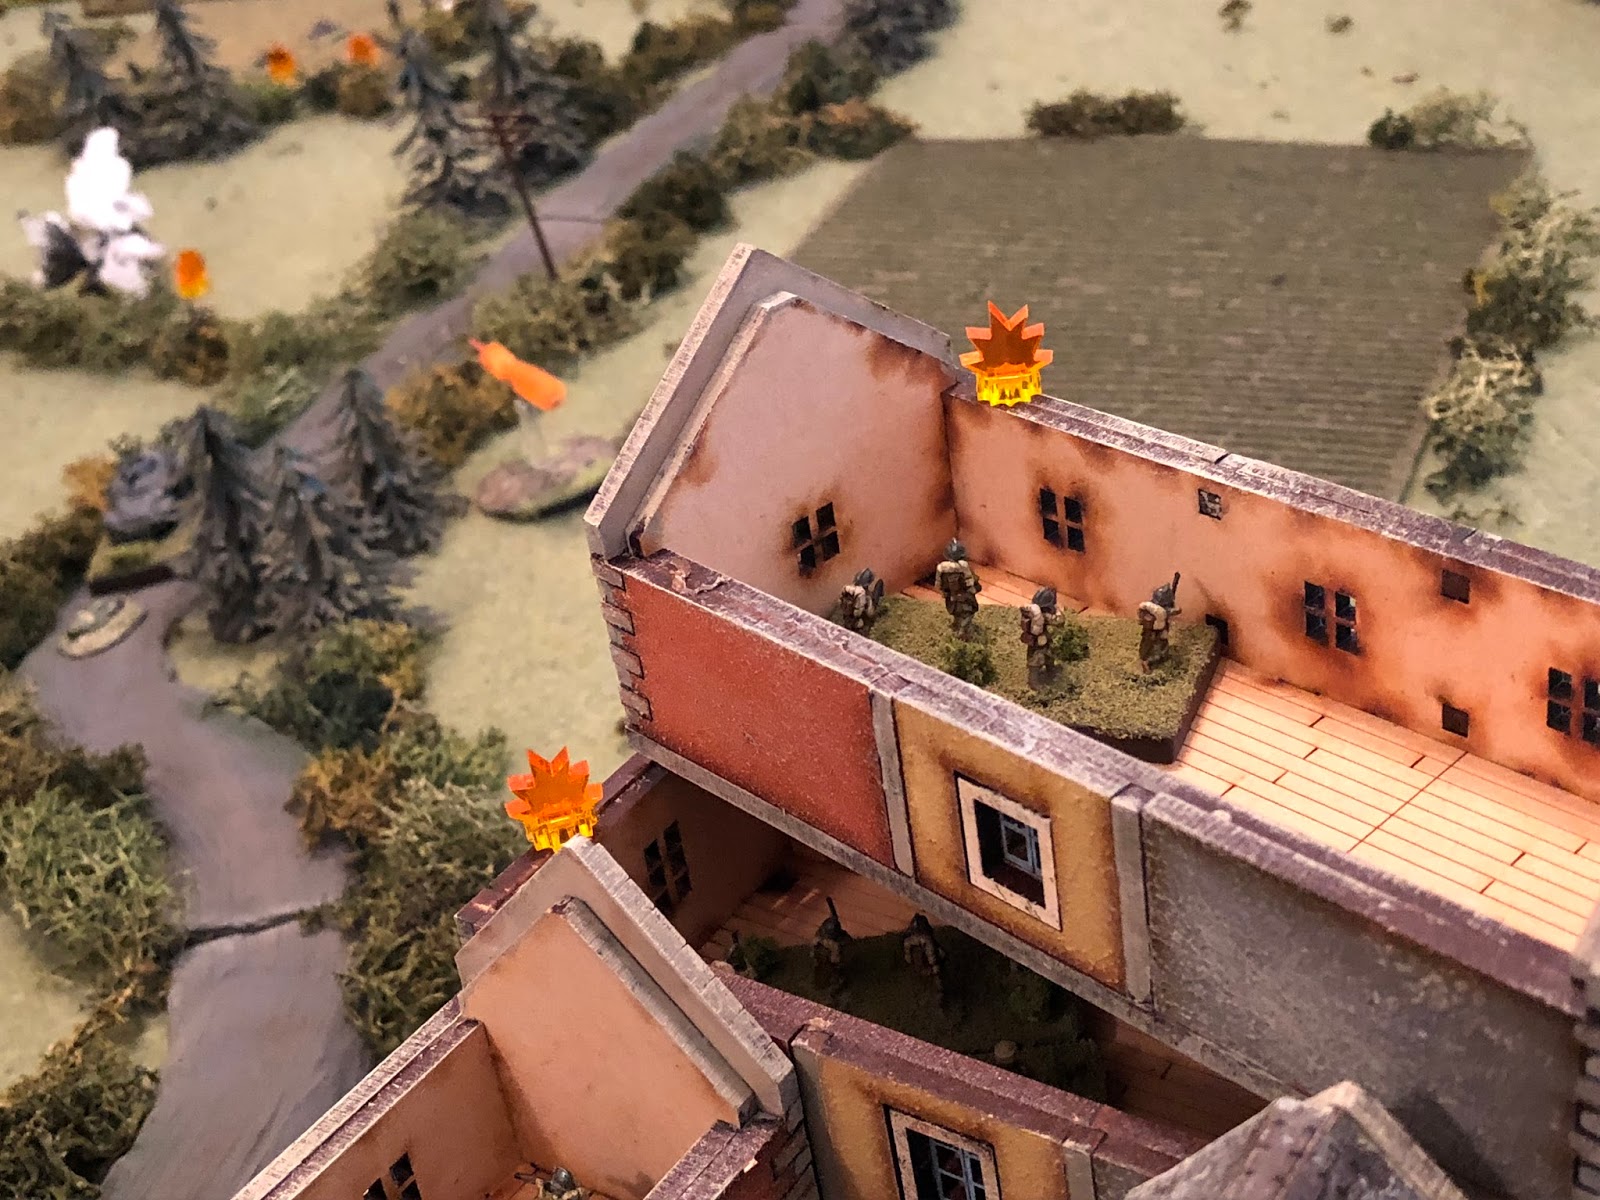  The French 2nd Platoon (right centre) continues to fire on the German 4th Platoon (top left), but they're already so beat up I'm not sure how you'd tell if the fire is effective or not... 